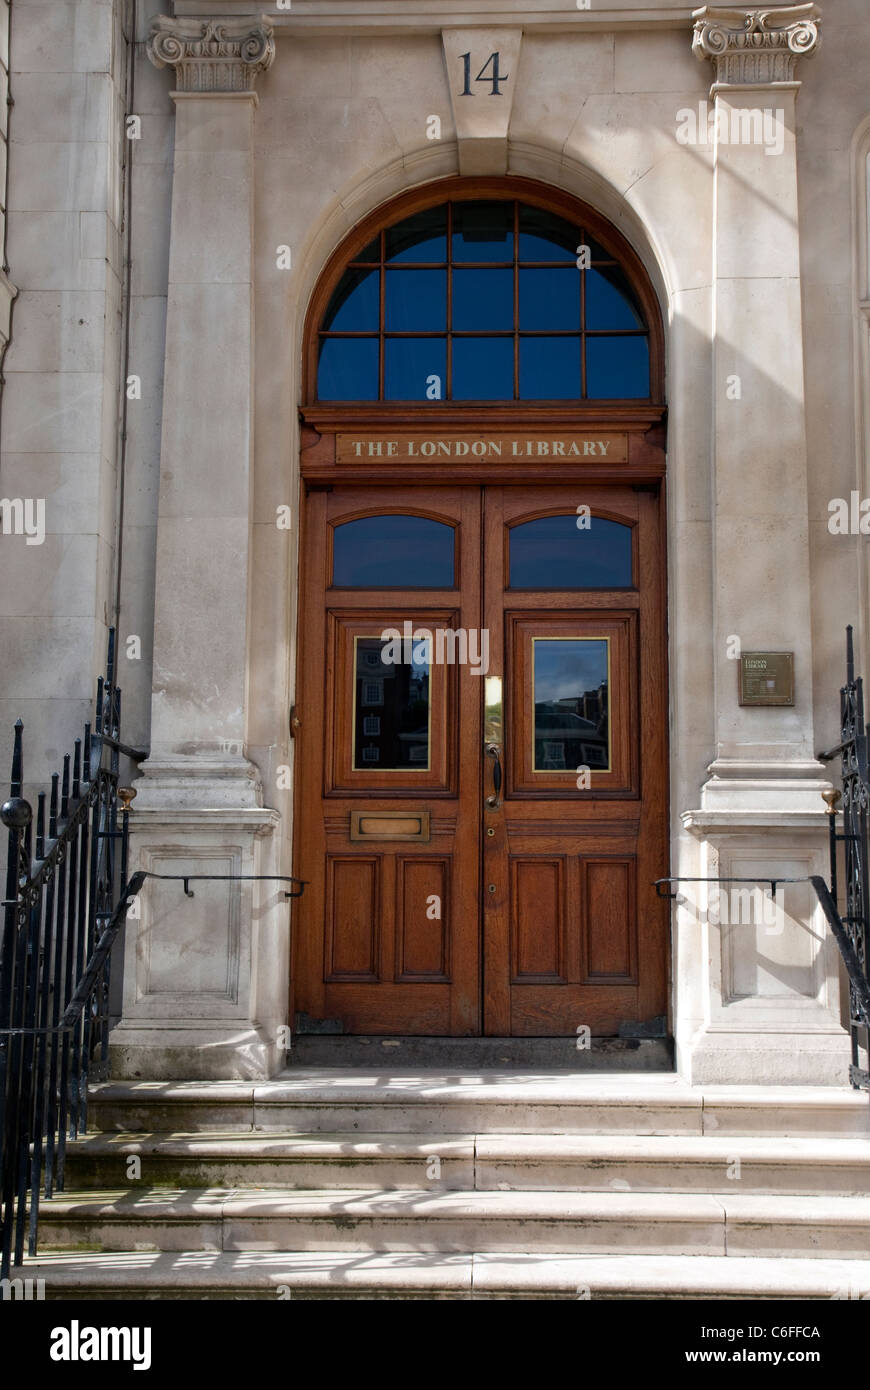 The London Library, St James's Square, London Stock Photo